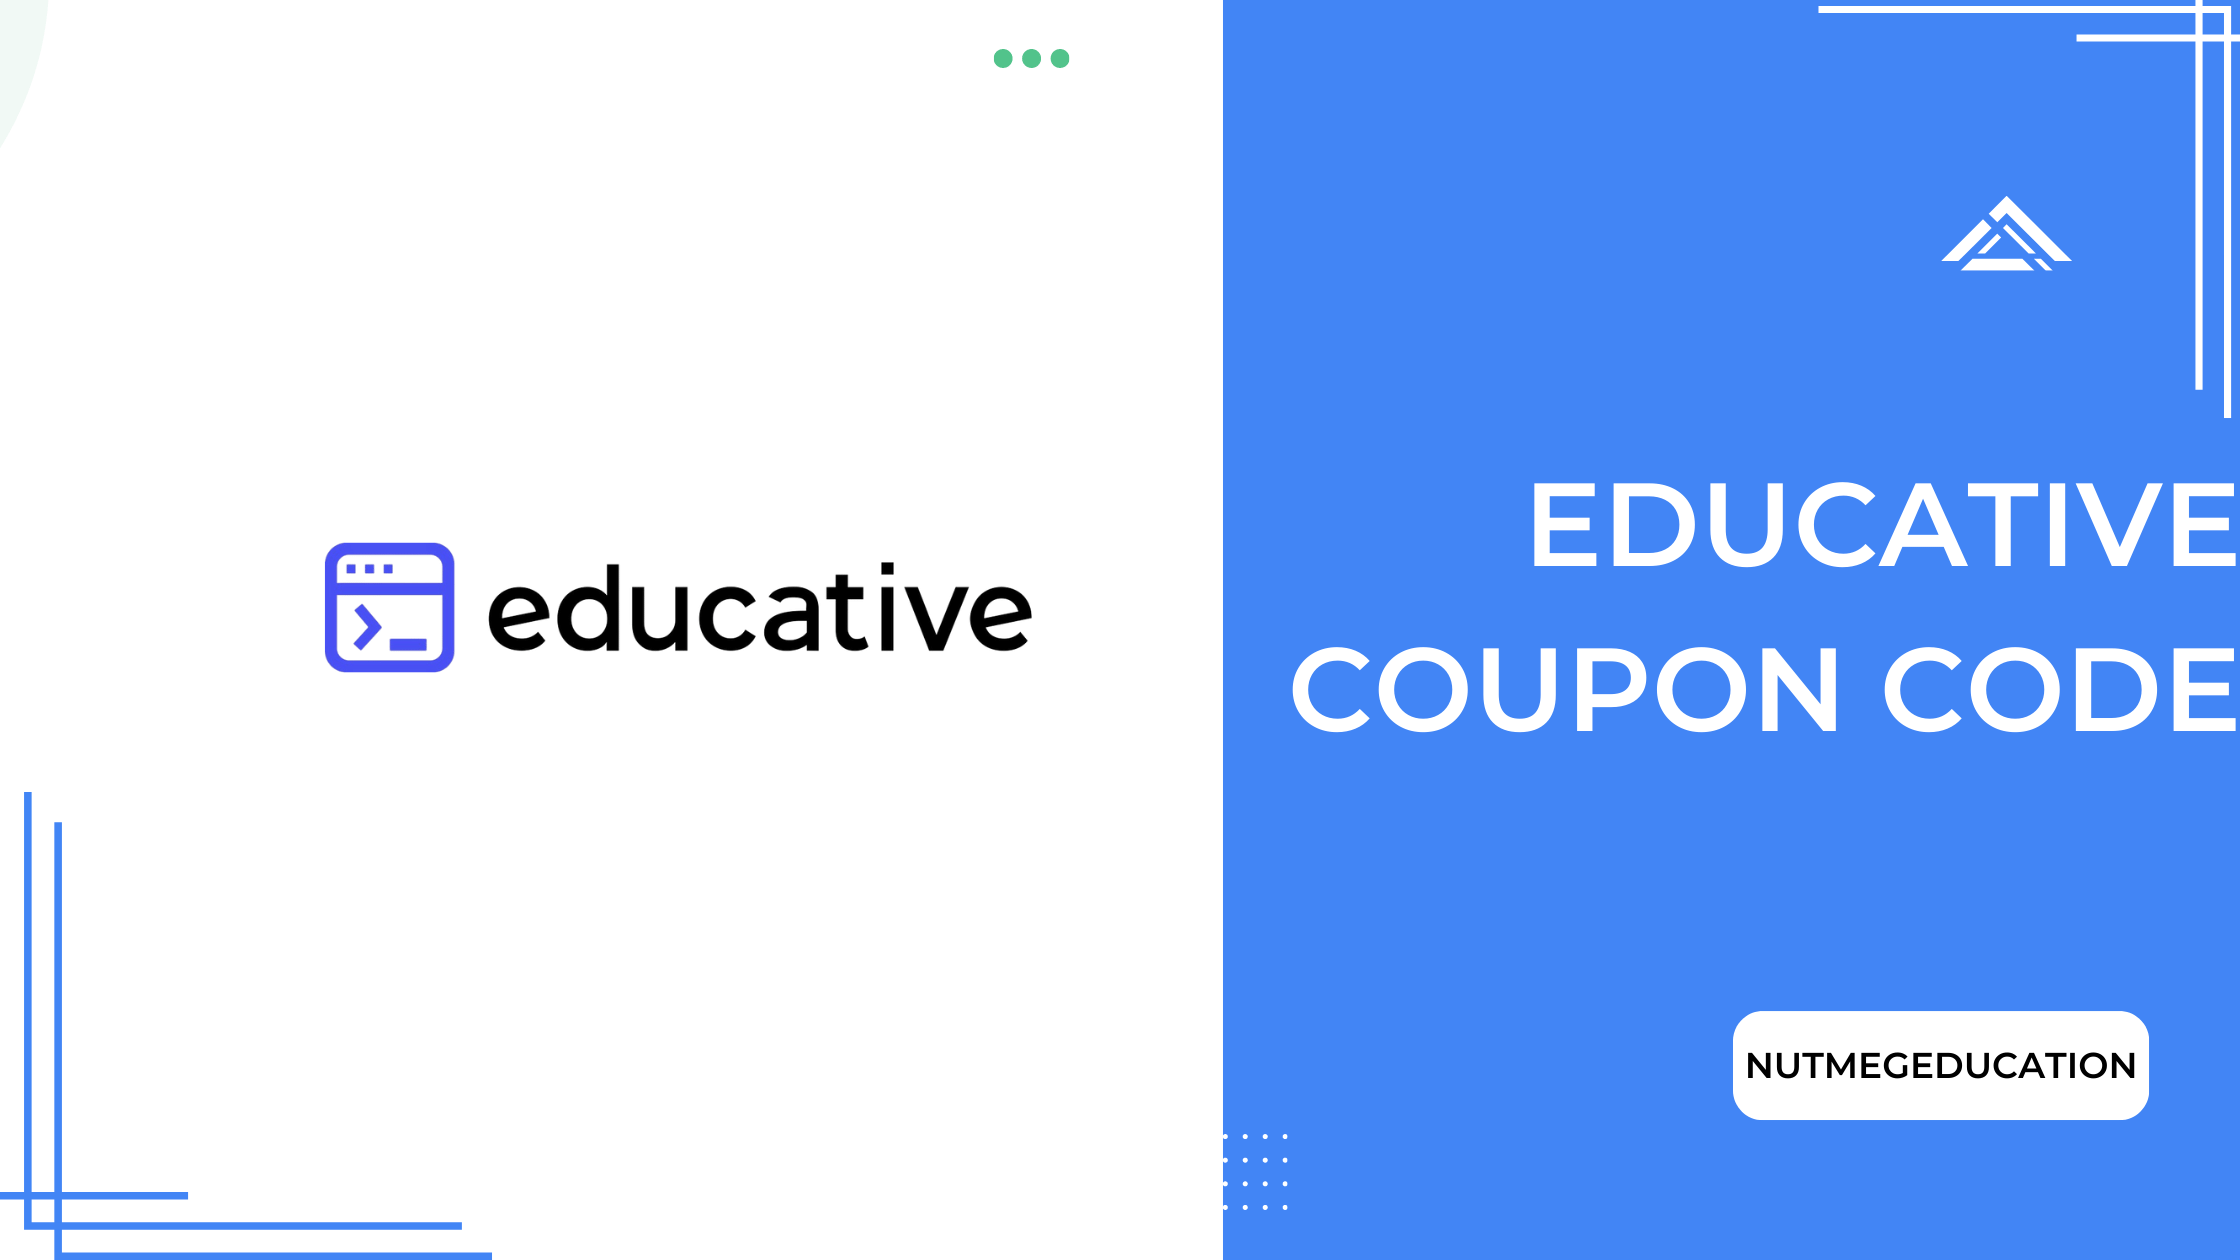 Educative Coupon Code - NutMegEducation